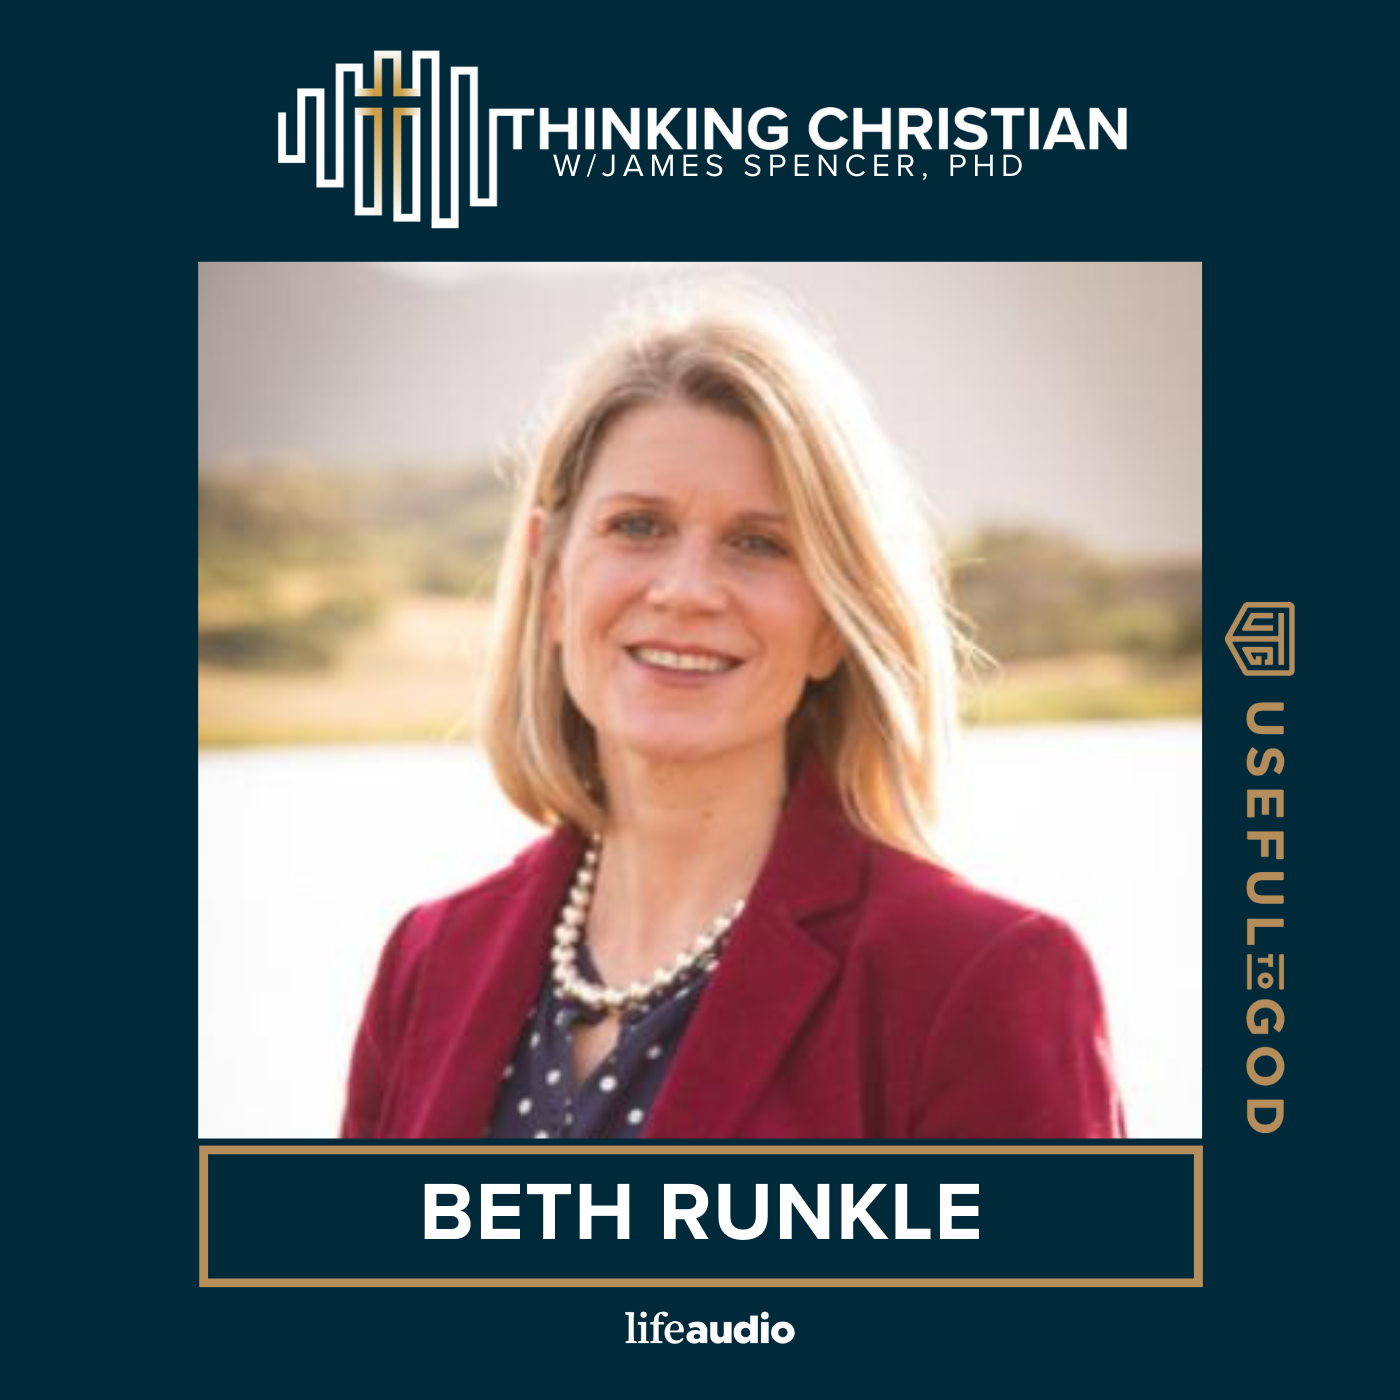 Staying Focused on Serving God Despite Our Circumstances: A Conversation with Beth Runkle, Pt 1